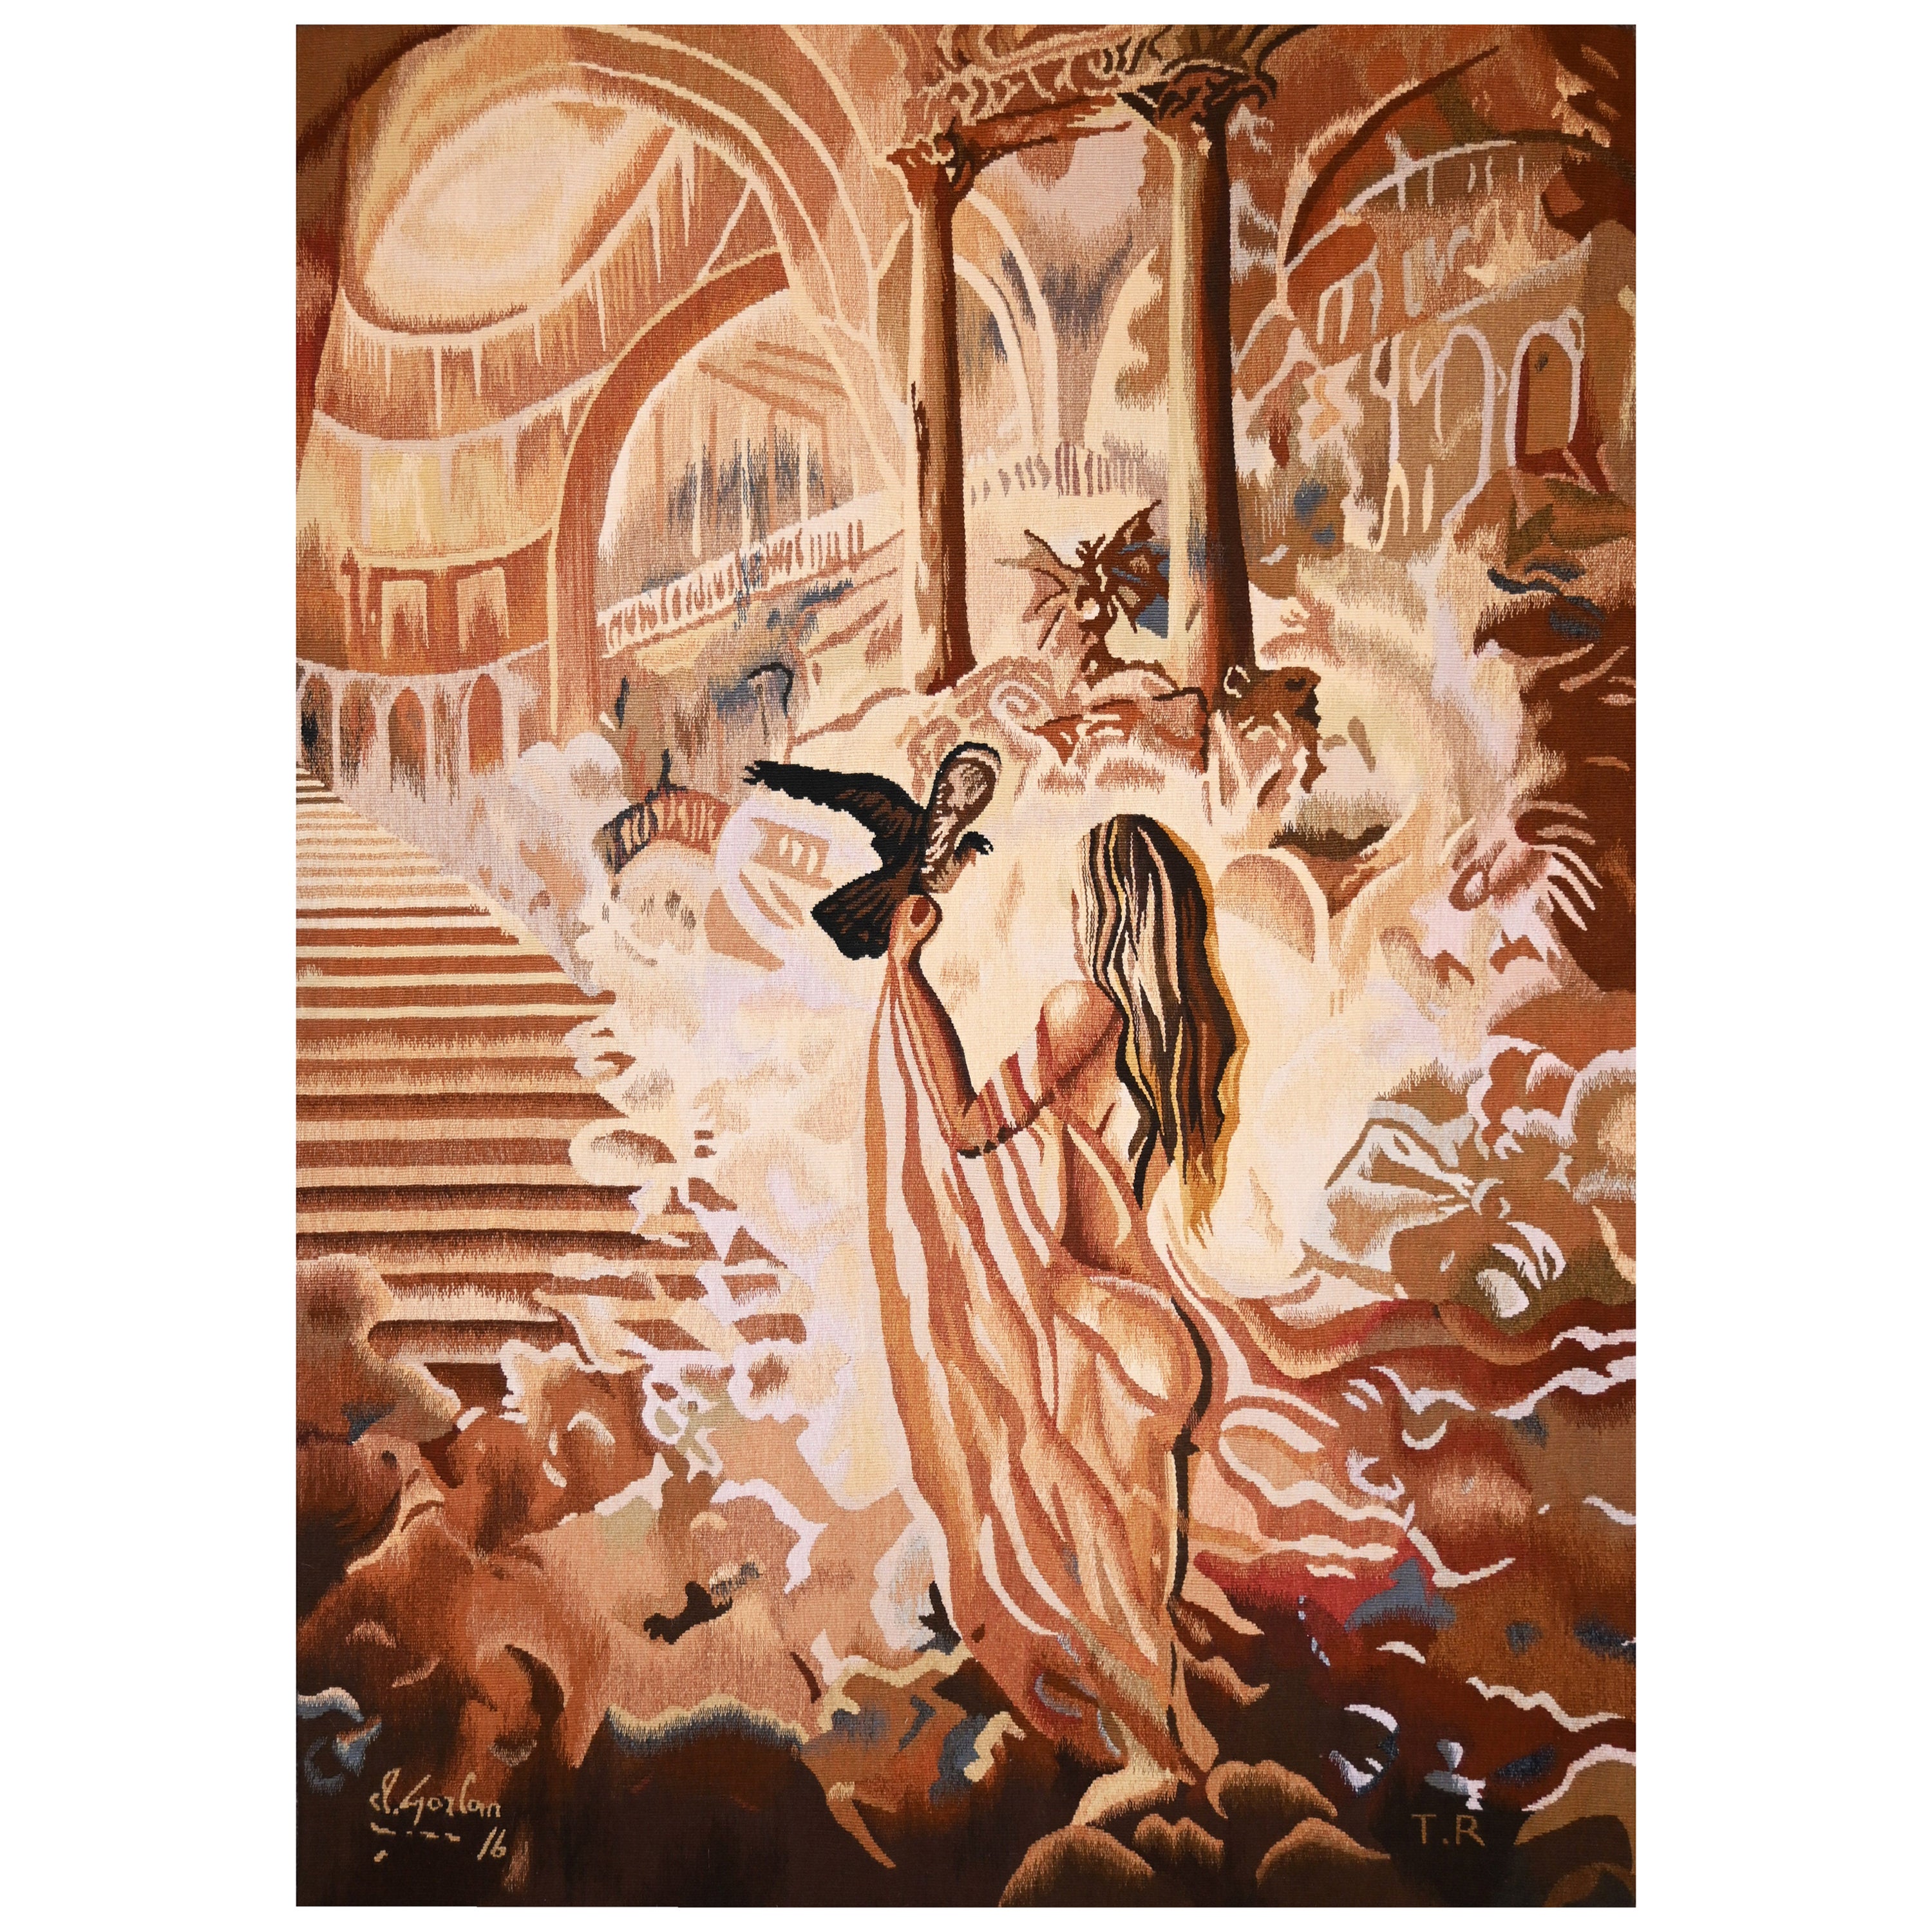 Claude Gozlan "the Palace of Chimeras" moderne french Tapestry Pinton - N° 1383 For Sale